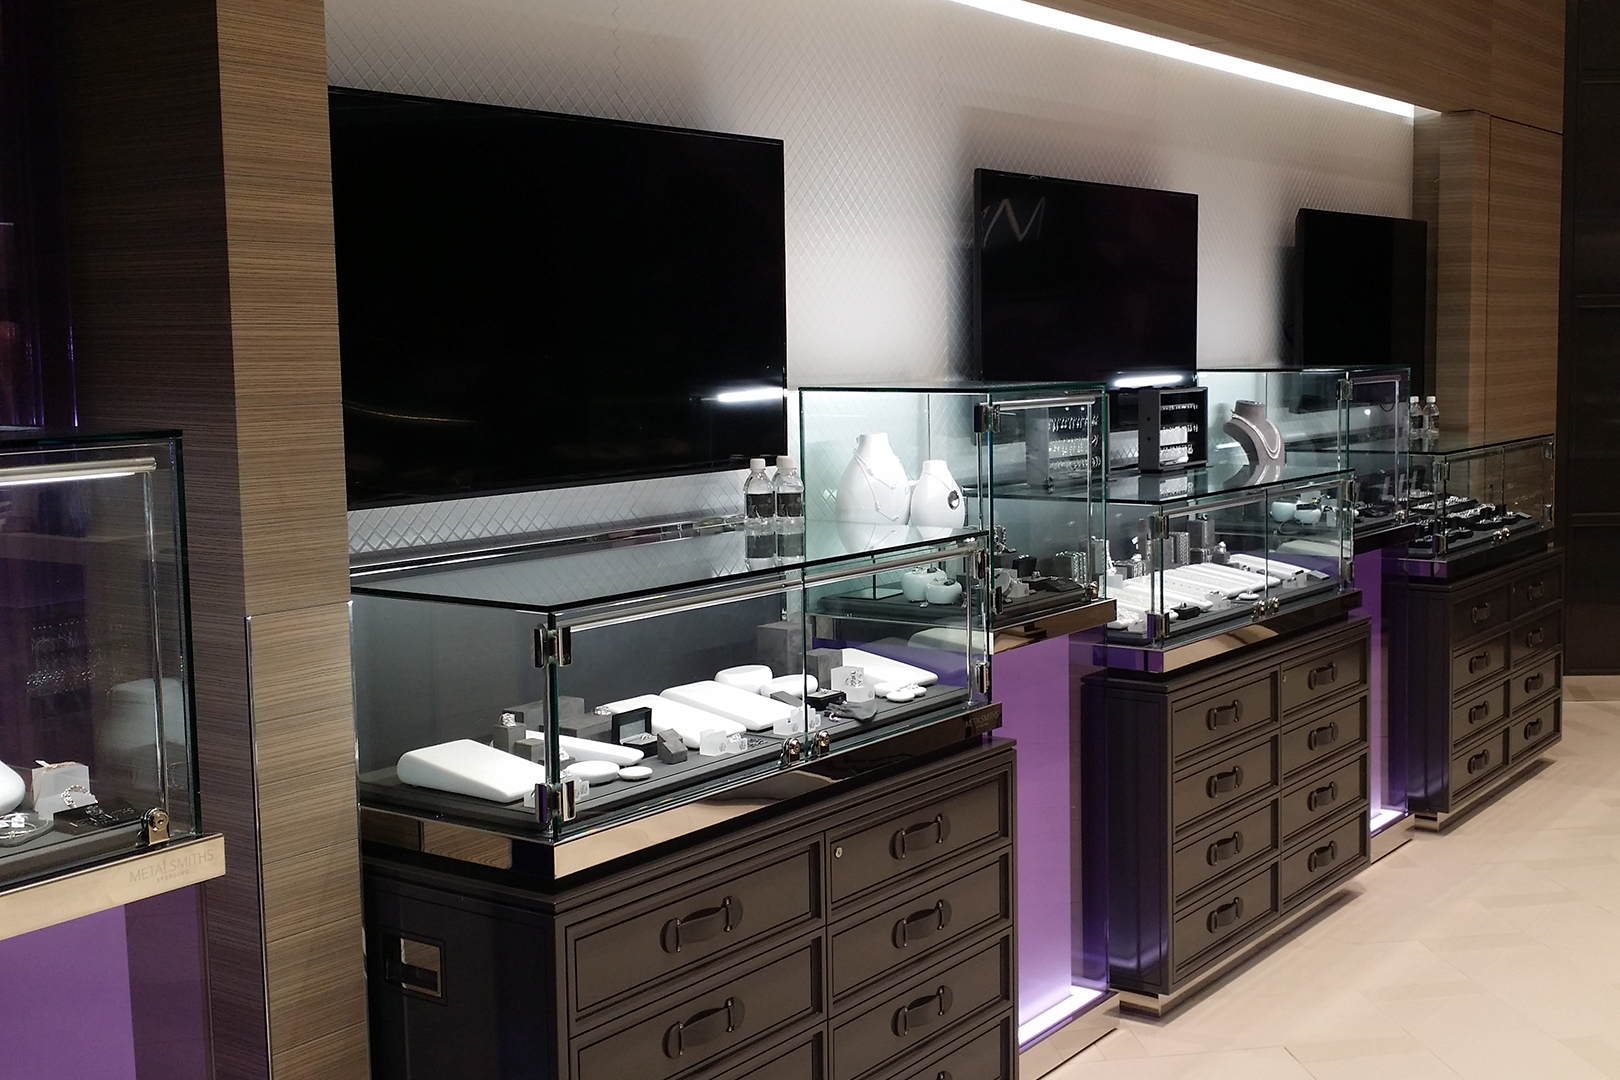 Metalsmiths wall units with glass museum displays